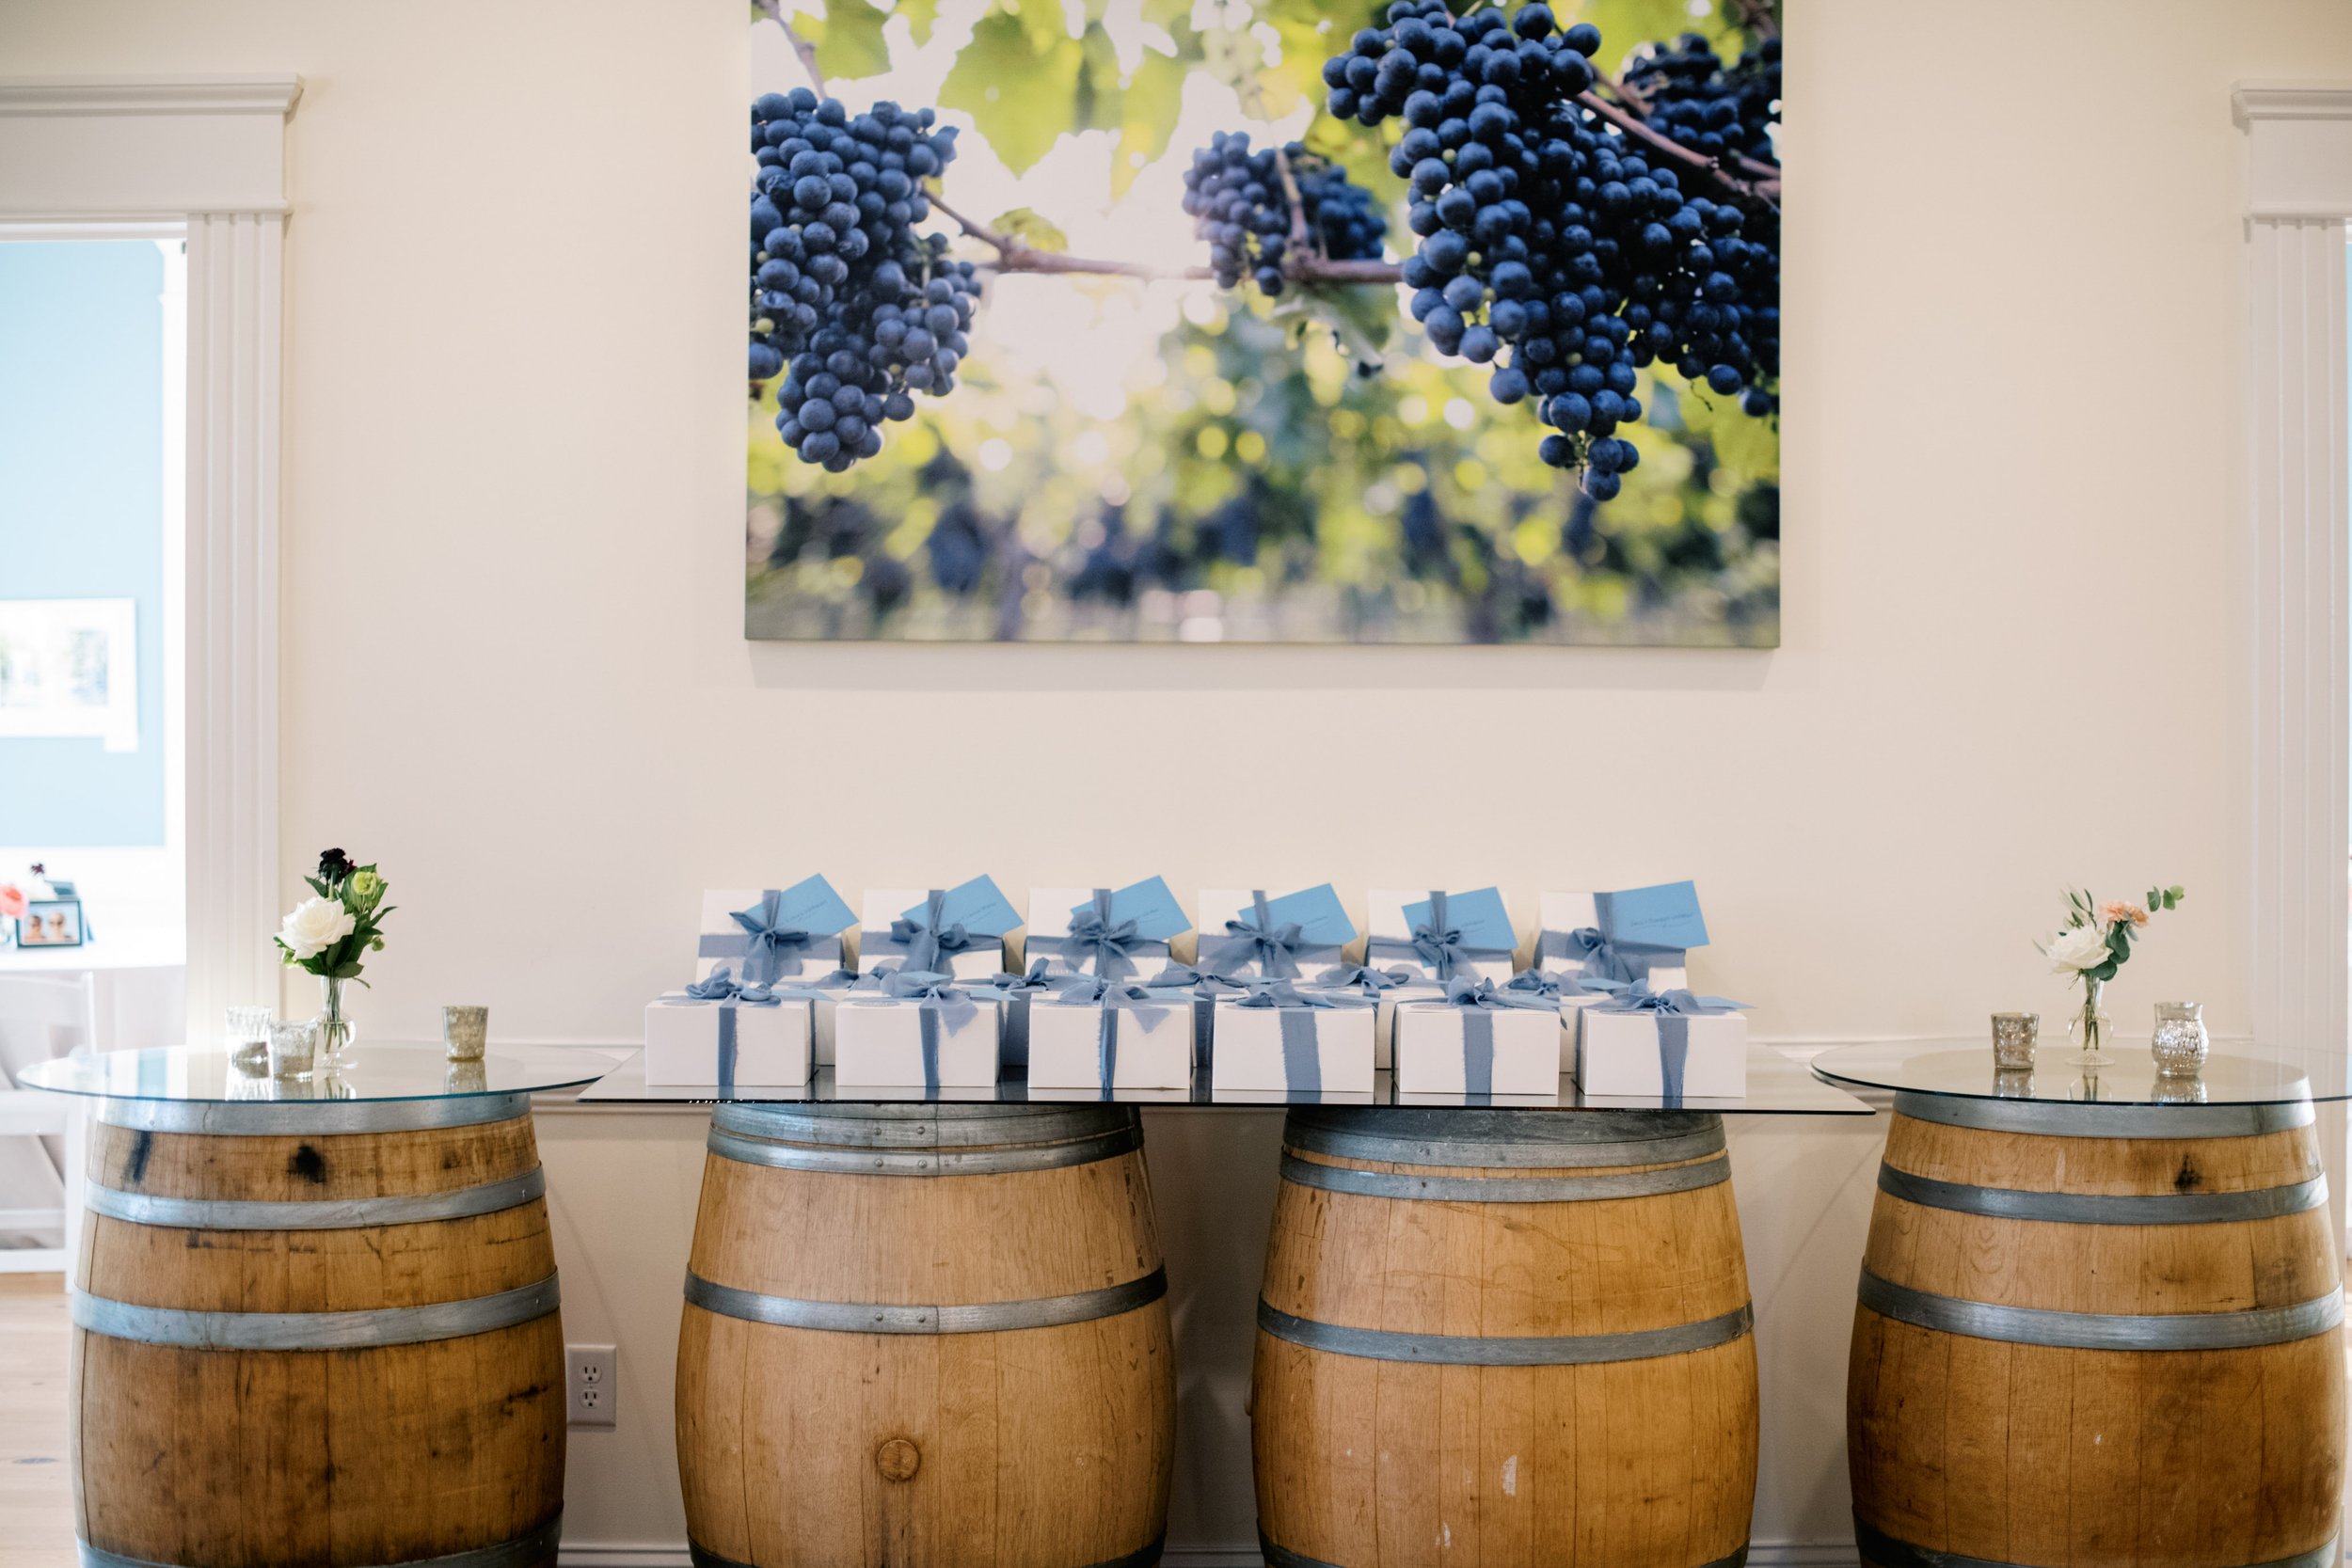 Rosemont Winery Rehearsal Dinner in Southern Virginia Lake Gaston Wedding by Fancy This Photography